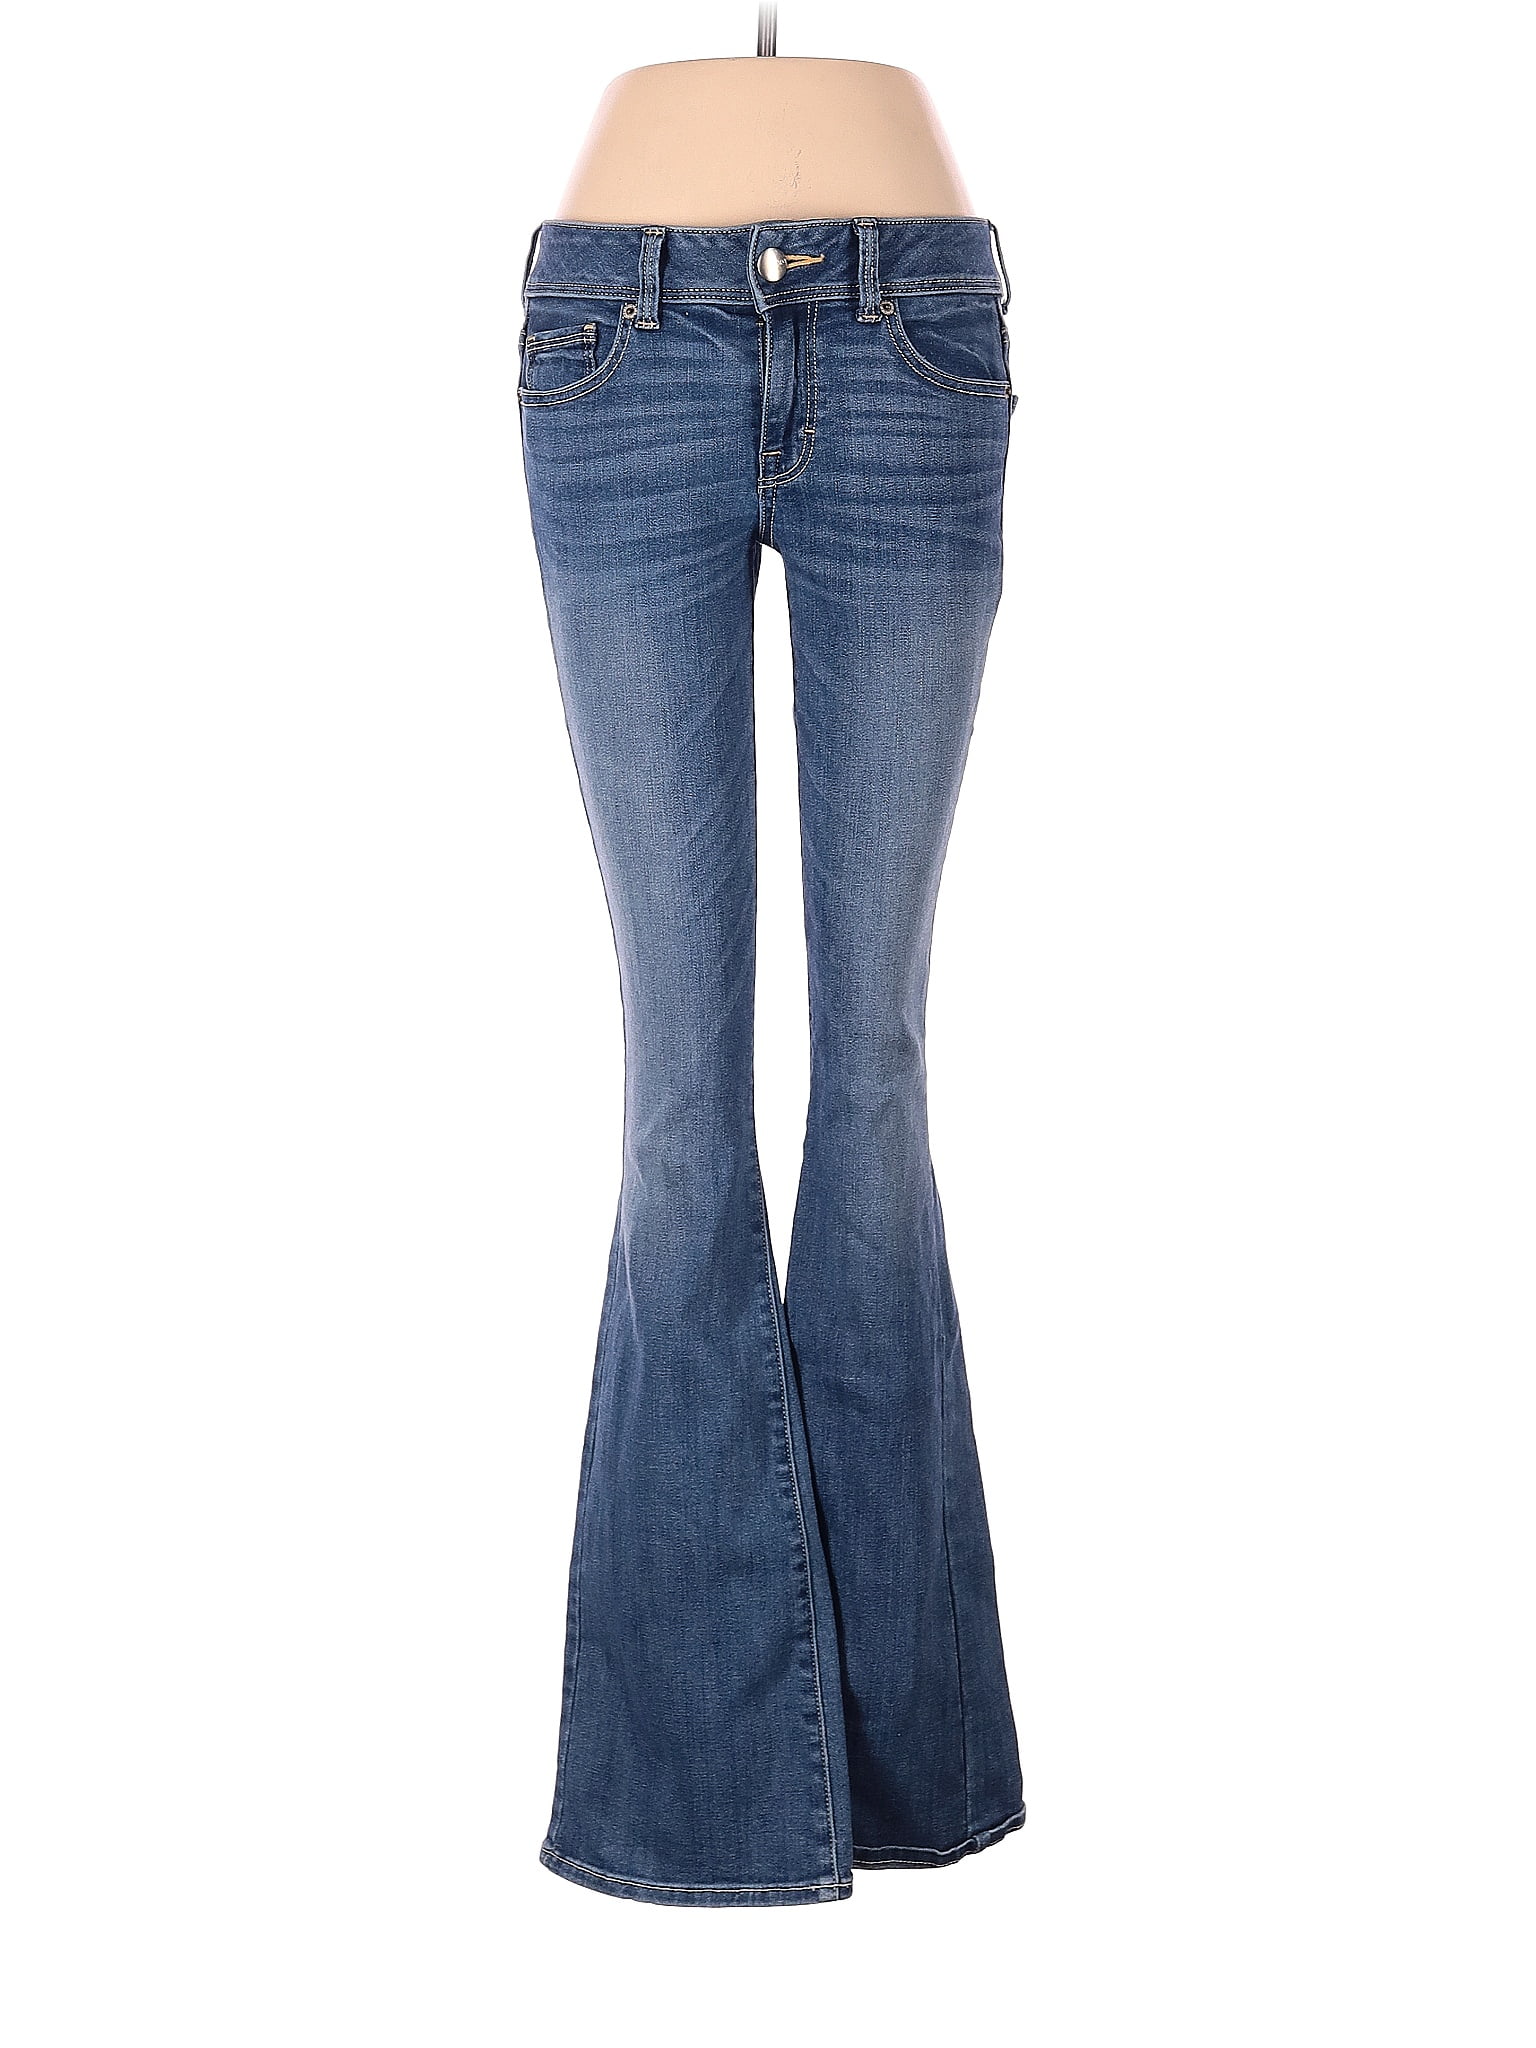 American Eagle Outfitters Blue Jeans Size 4 - 50% off | thredUP